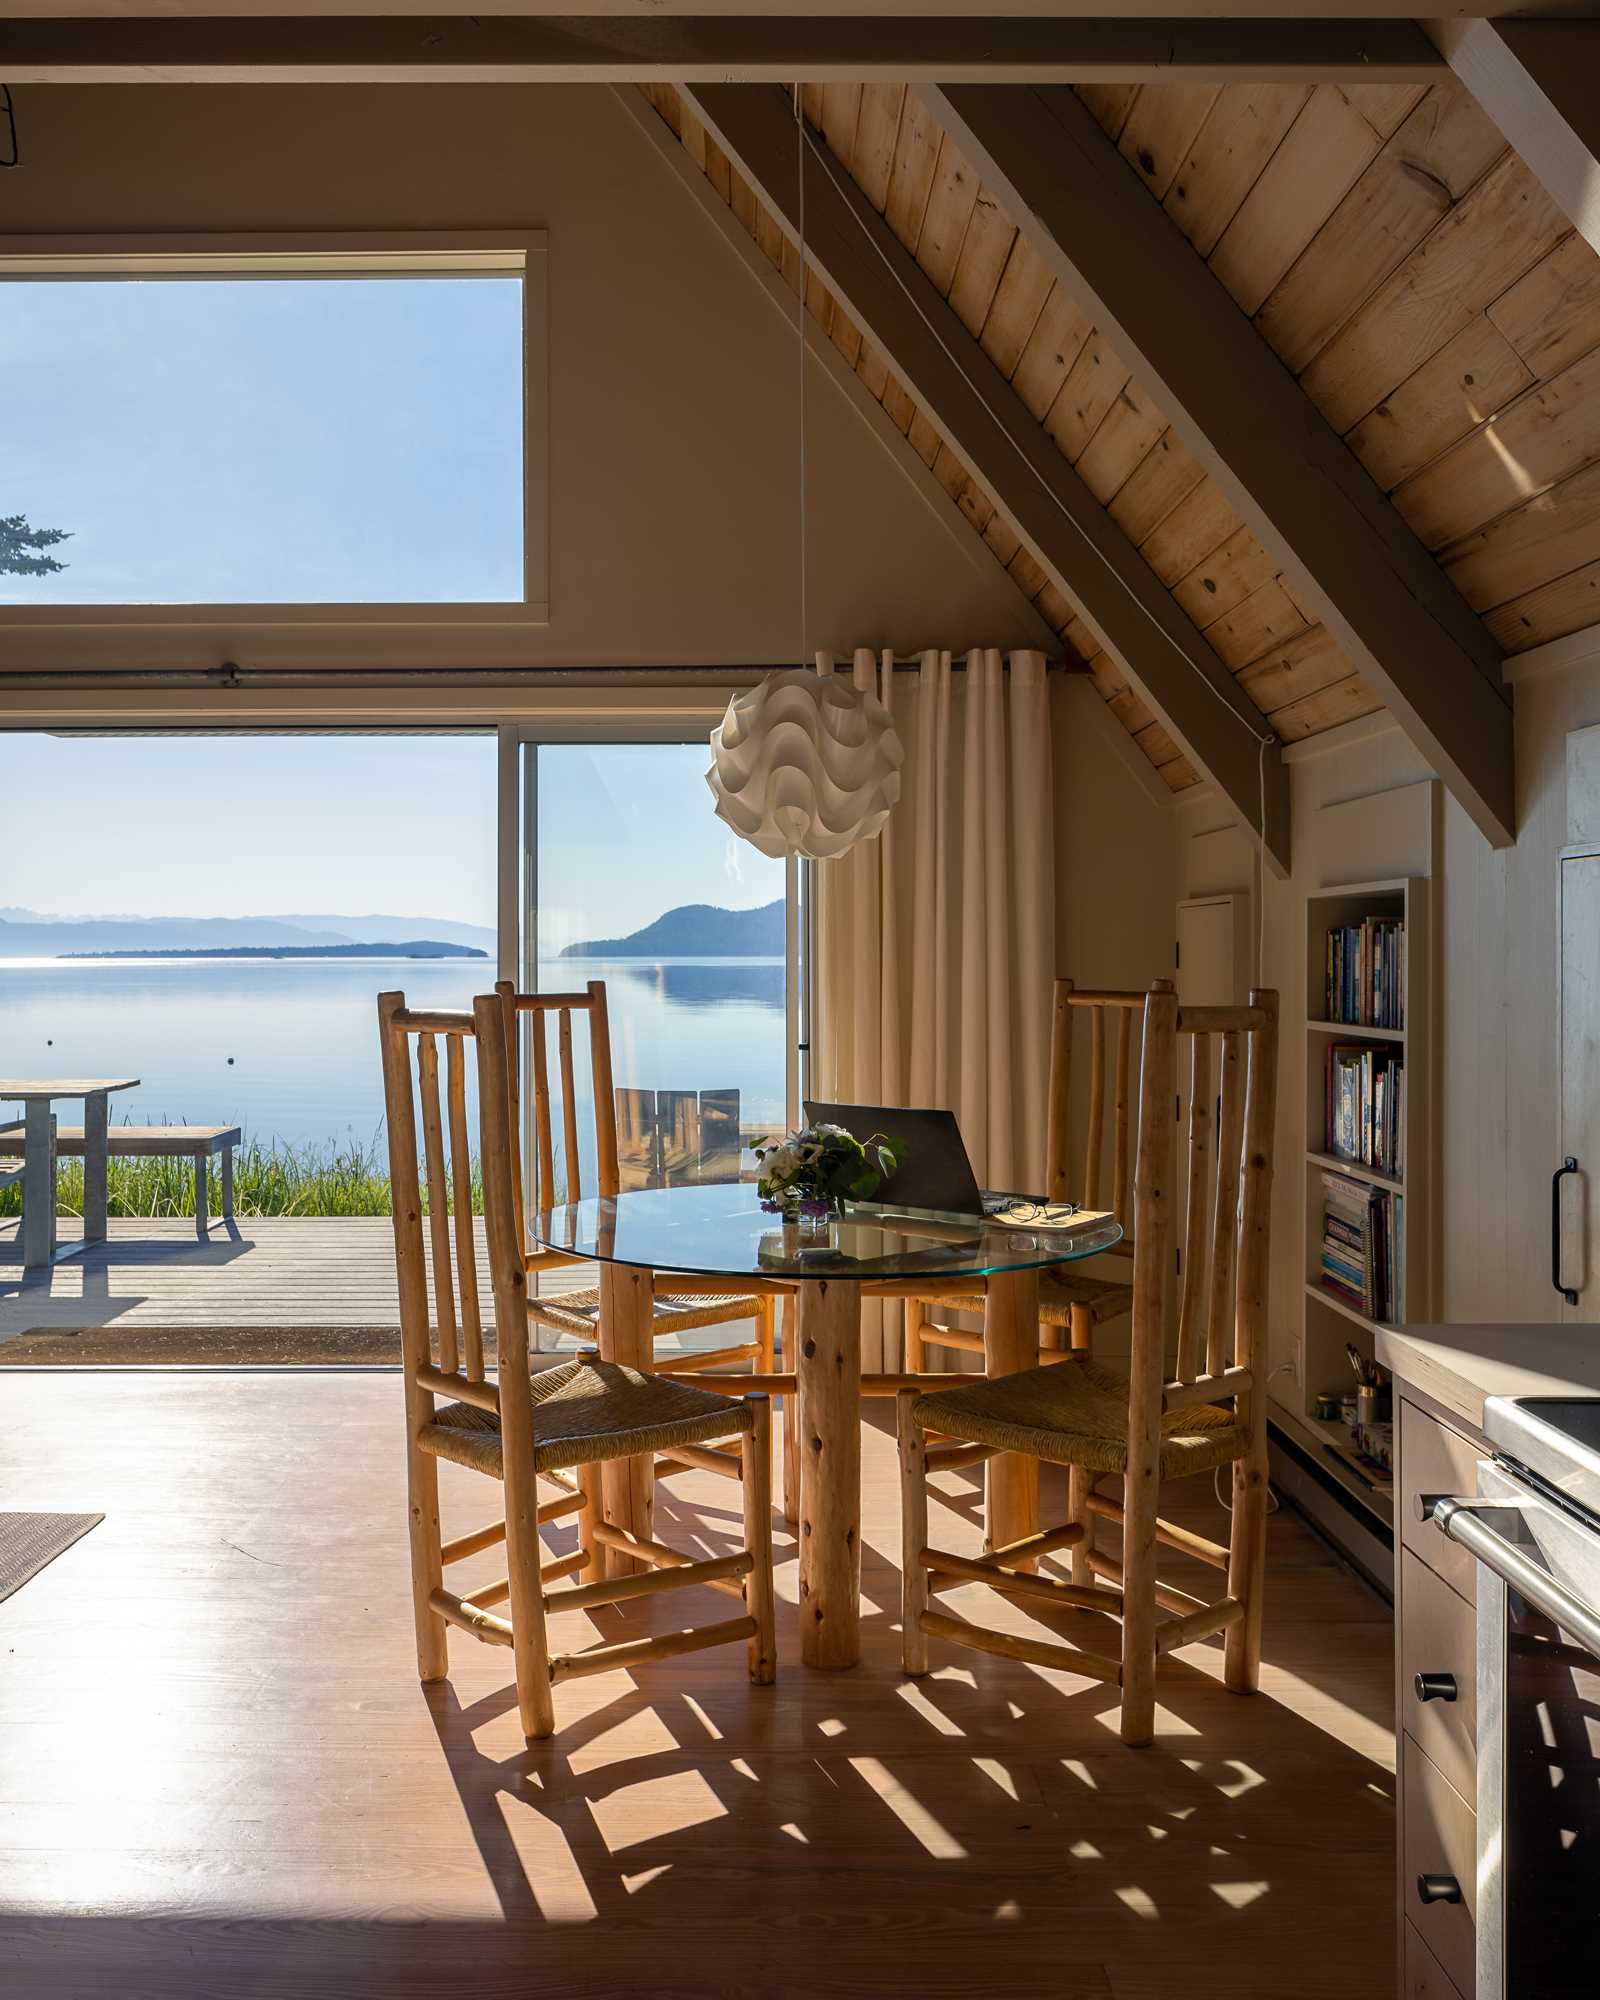 The social areas of this A-frame home connect with the outdoor spaces via sliding doors, which also provide a view of the water.